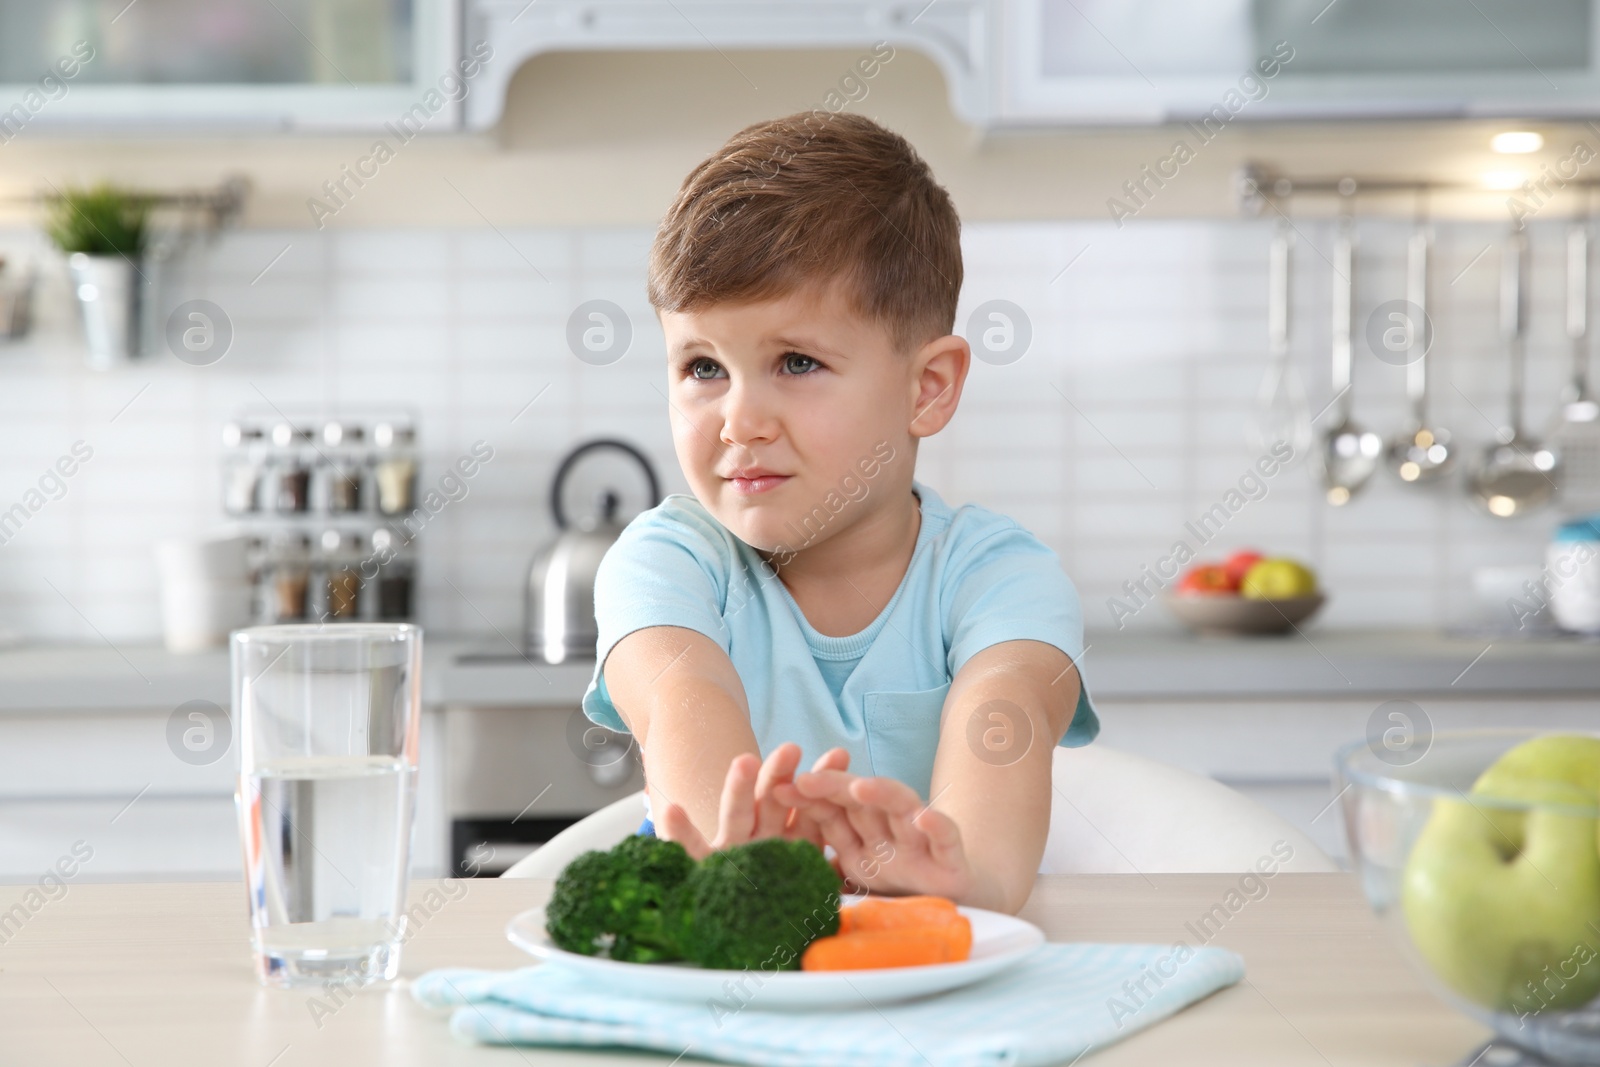 Photo of Adorable little boy refusing to eat vegetables at table in kitchen